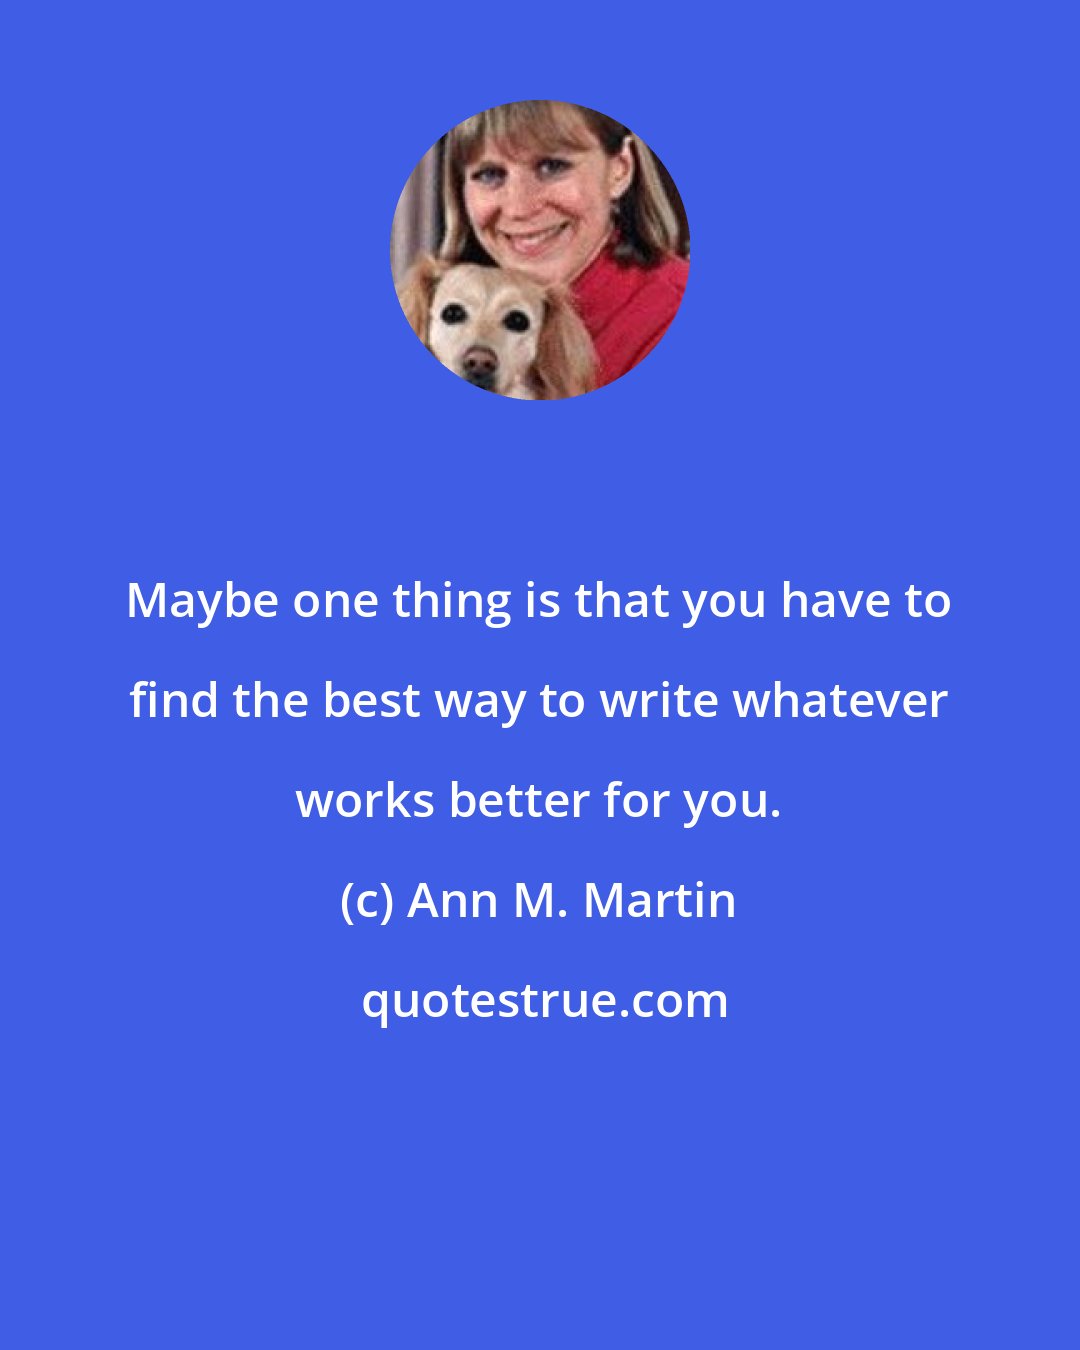 Ann M. Martin: Maybe one thing is that you have to find the best way to write whatever works better for you.